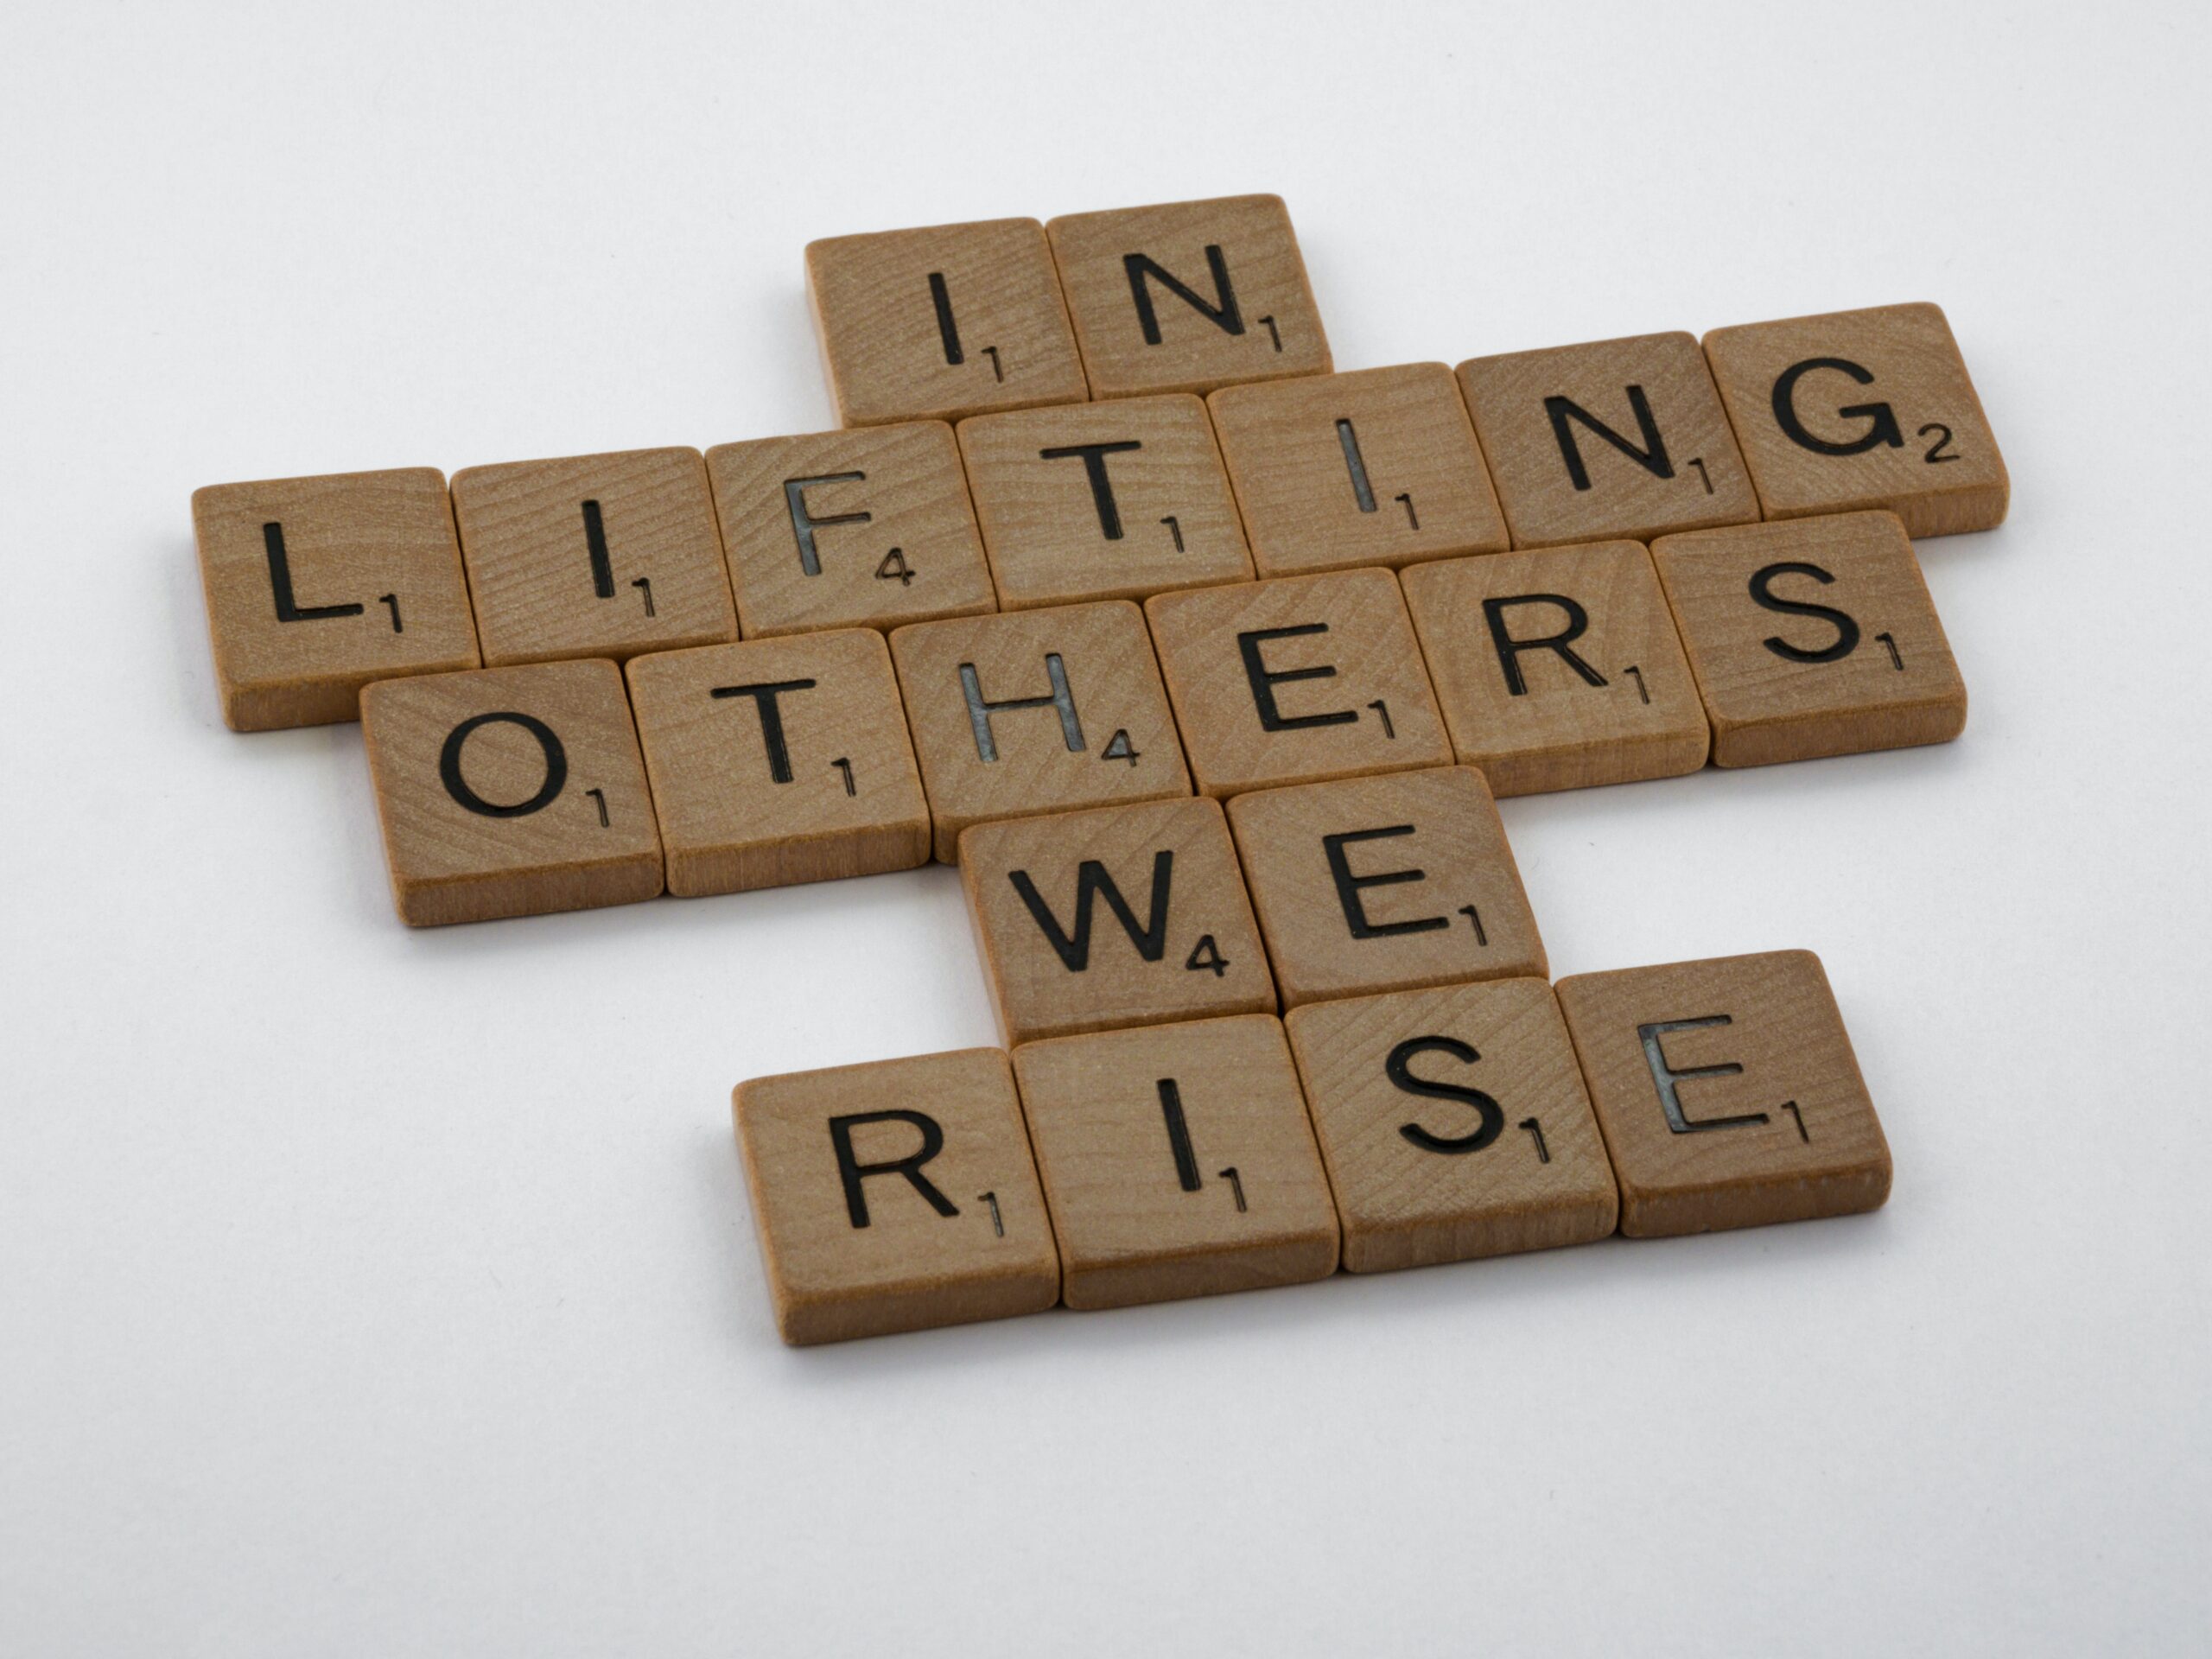 Scrabble tiles spelling out 'In lifting others we rise' against white background